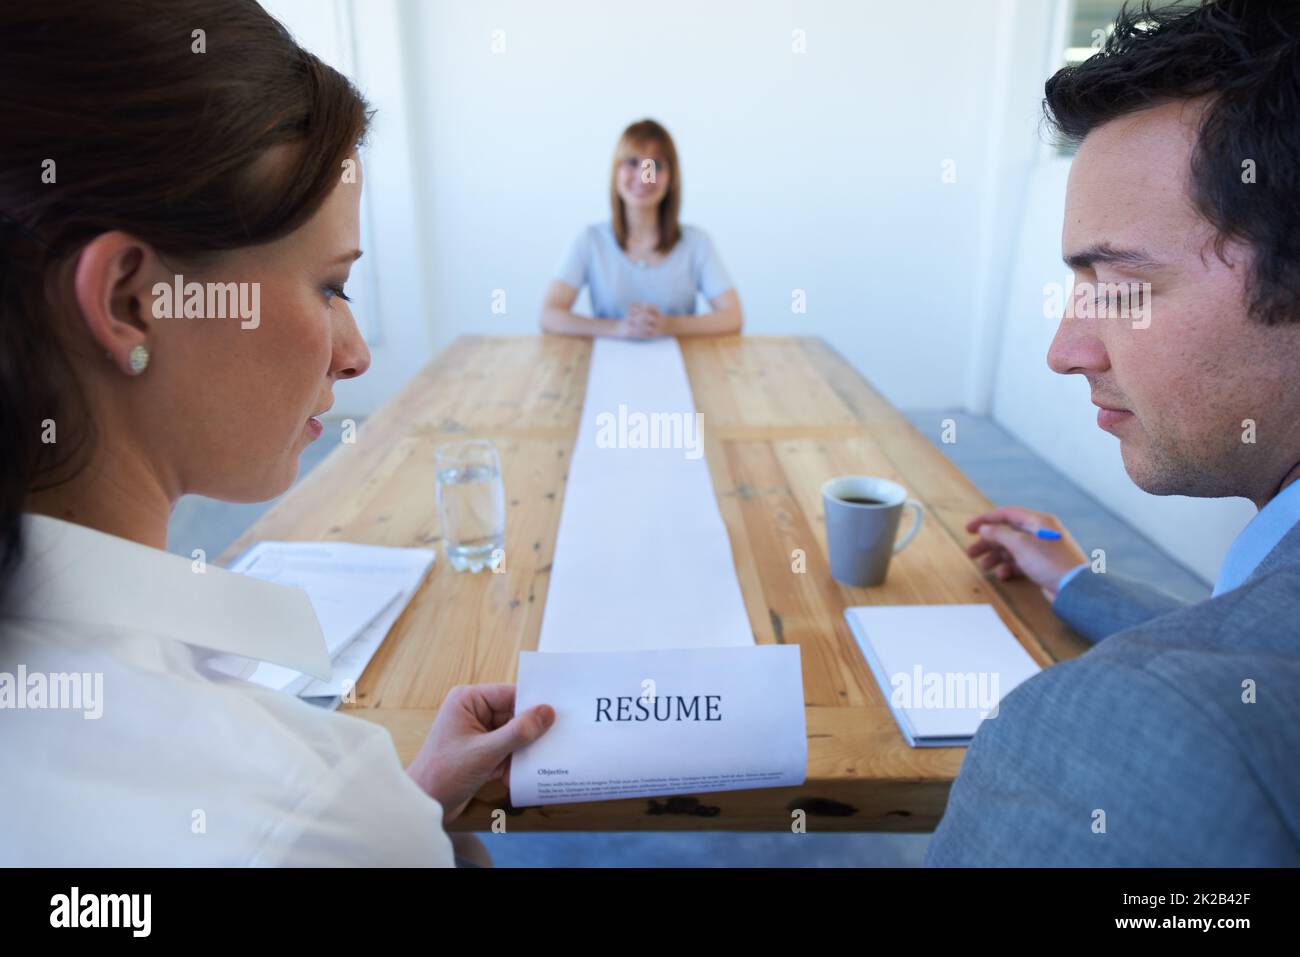 This is exceptionally long.... Two employers astounded by the long resume a candidate has brought in to an interview. Stock Photo